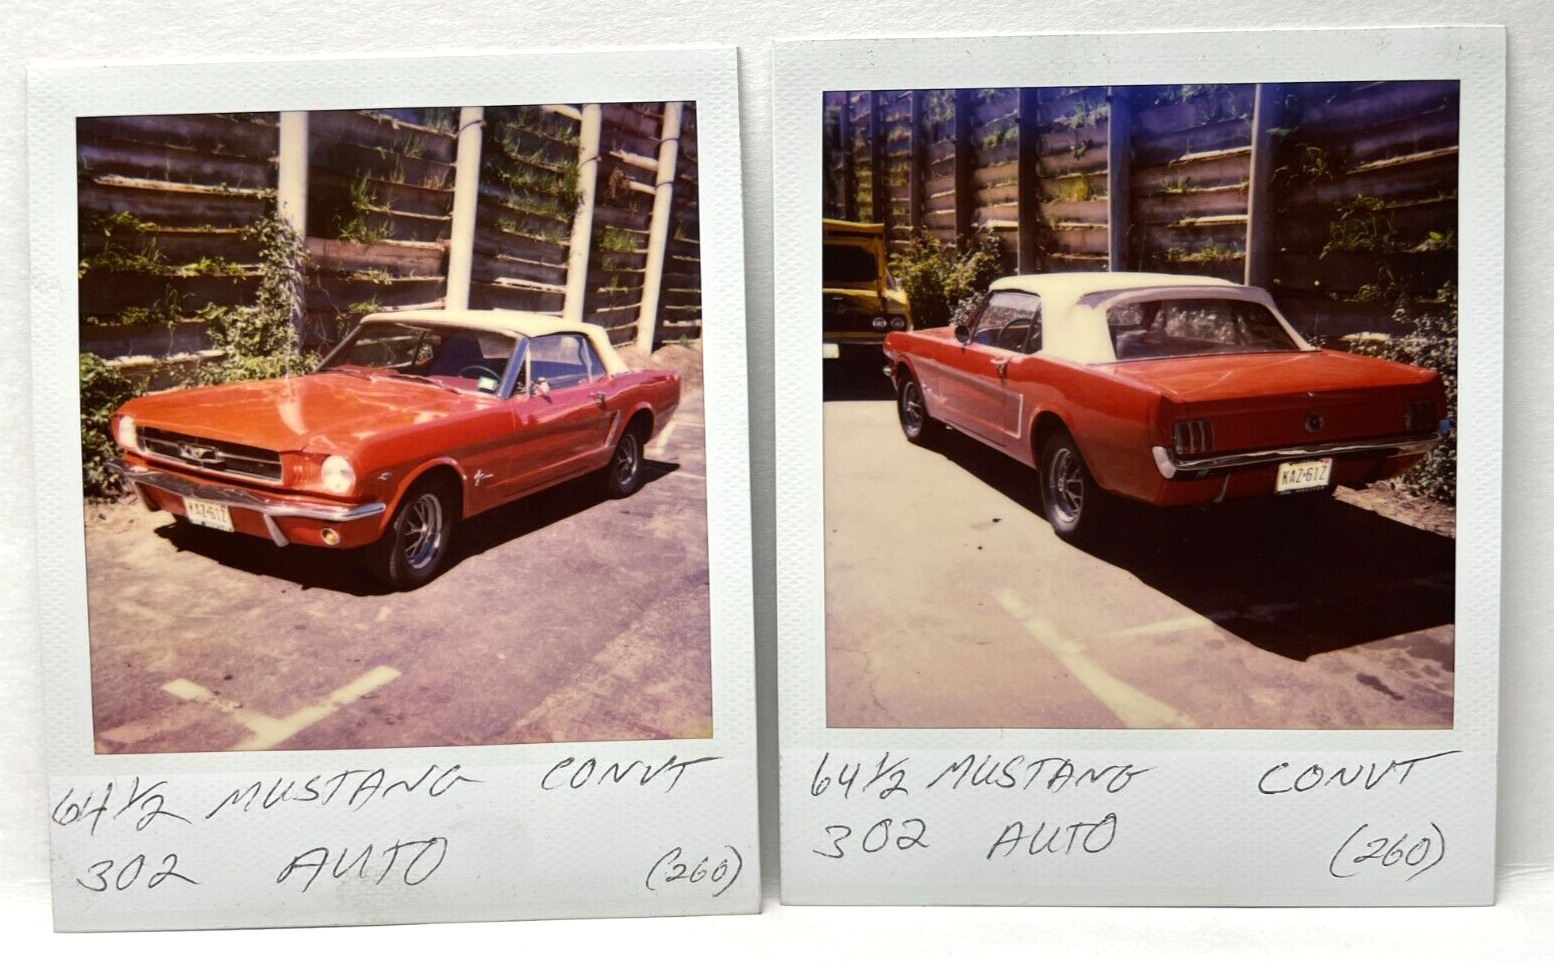 CC9 Photograph 1980s Polaroid Artistic 1964 1/2 Ford Mustang 302 Auto Convrt Red